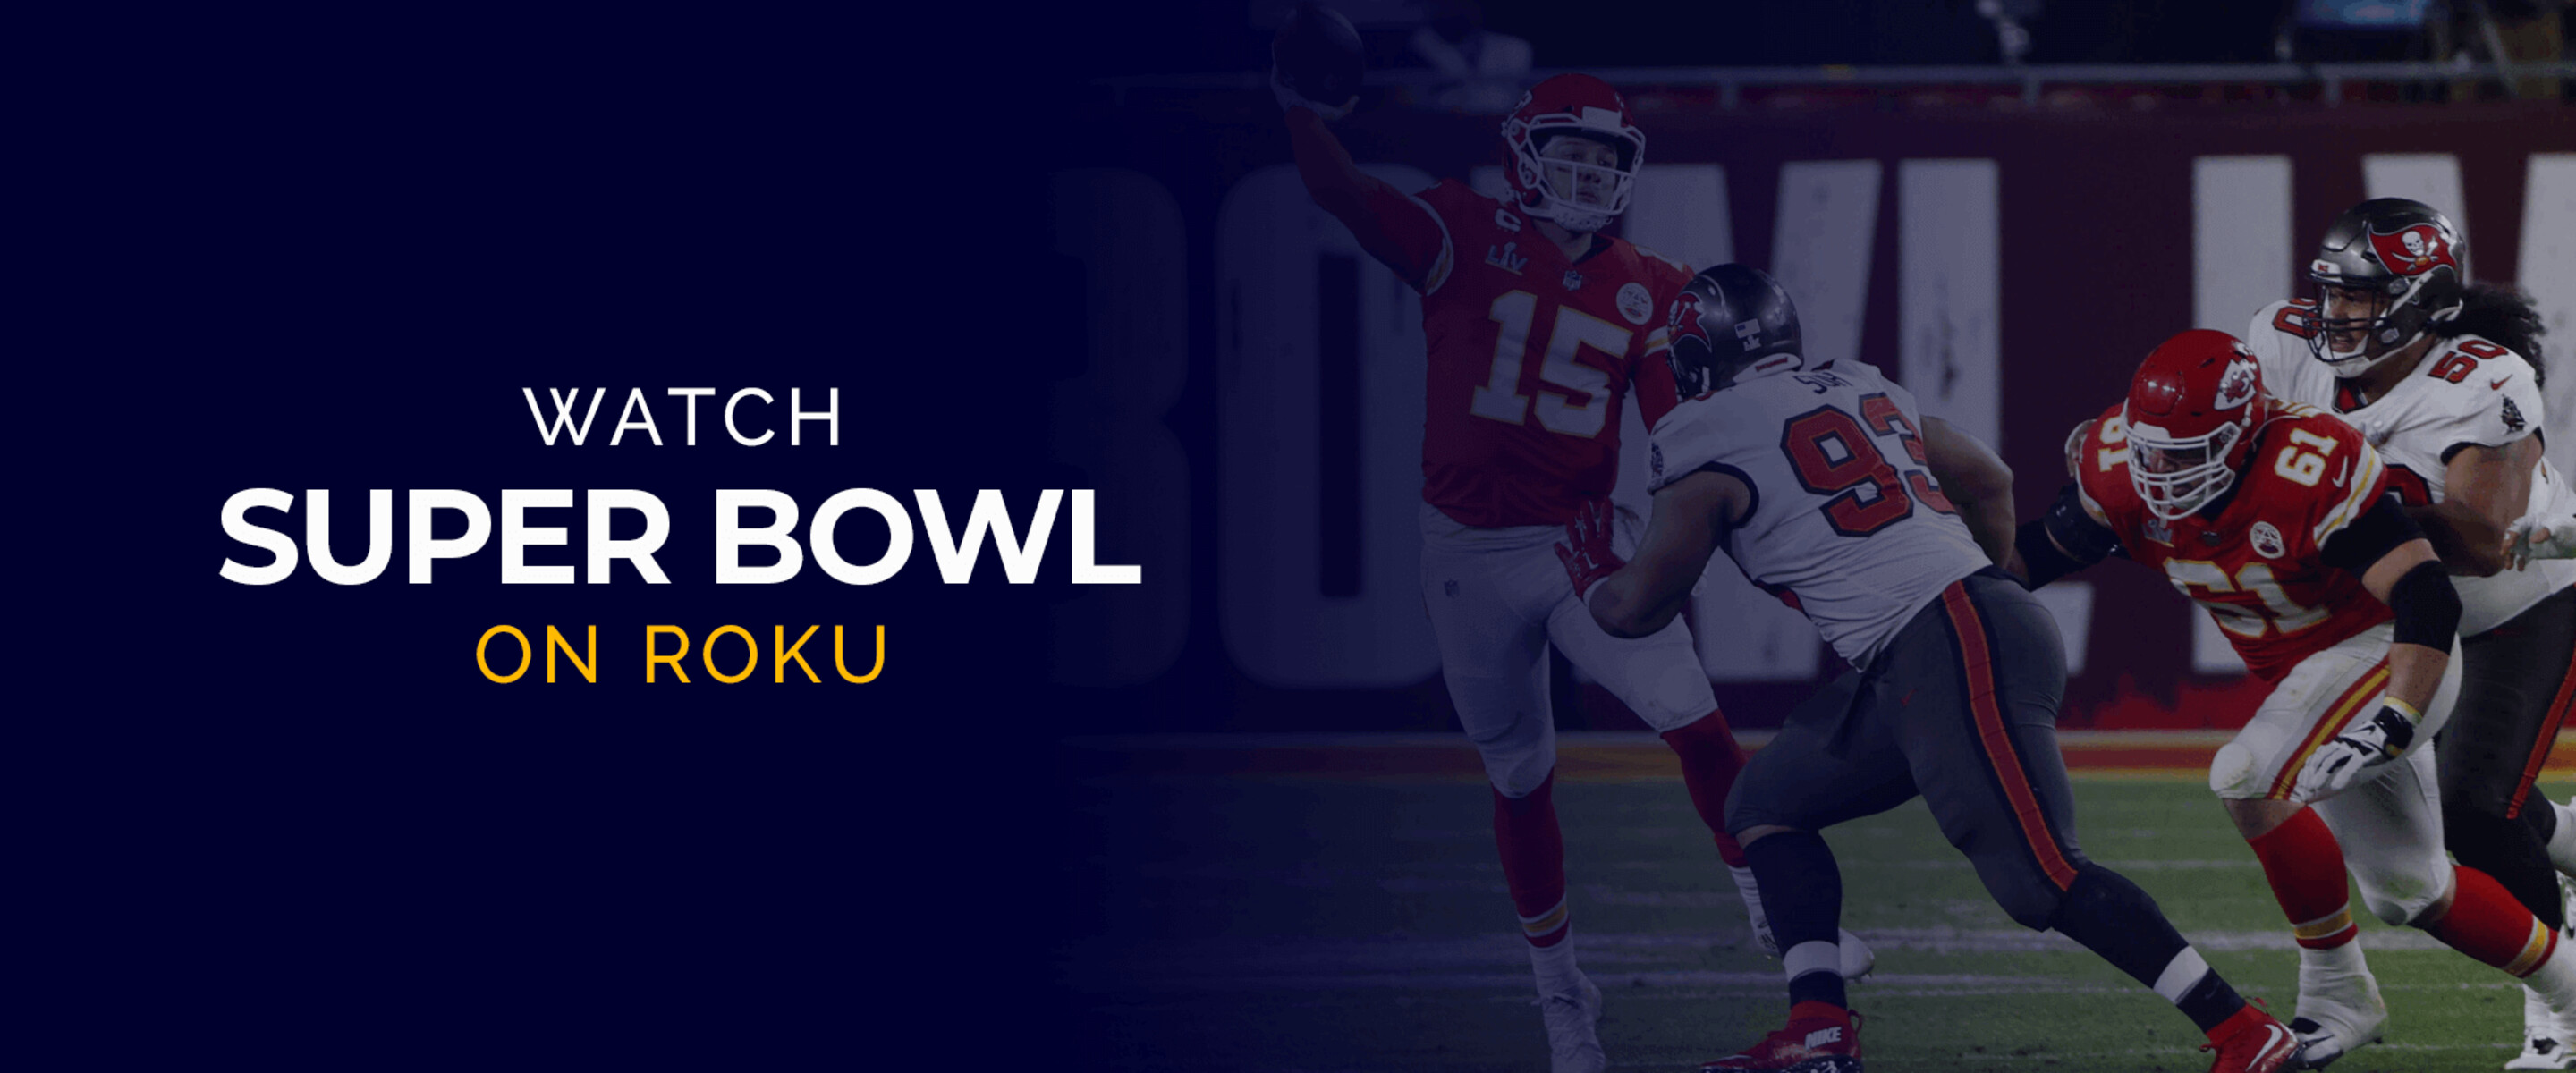 How To Watch Superbowl On Roku